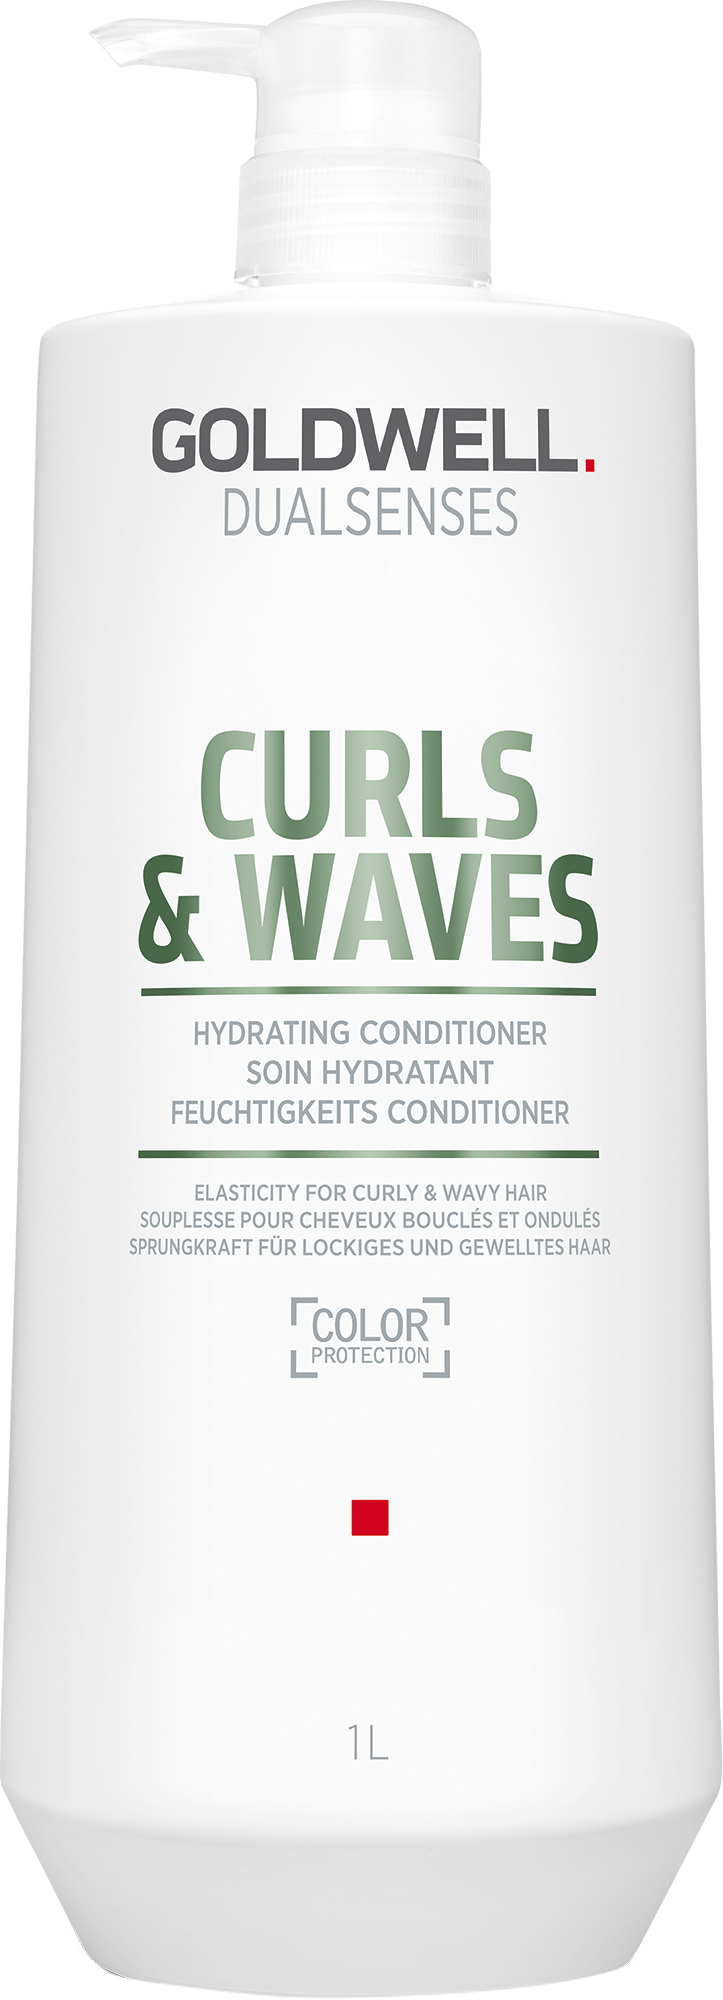 Goldwell-DUALSENSES CURLS & WAVES CONDITIONER